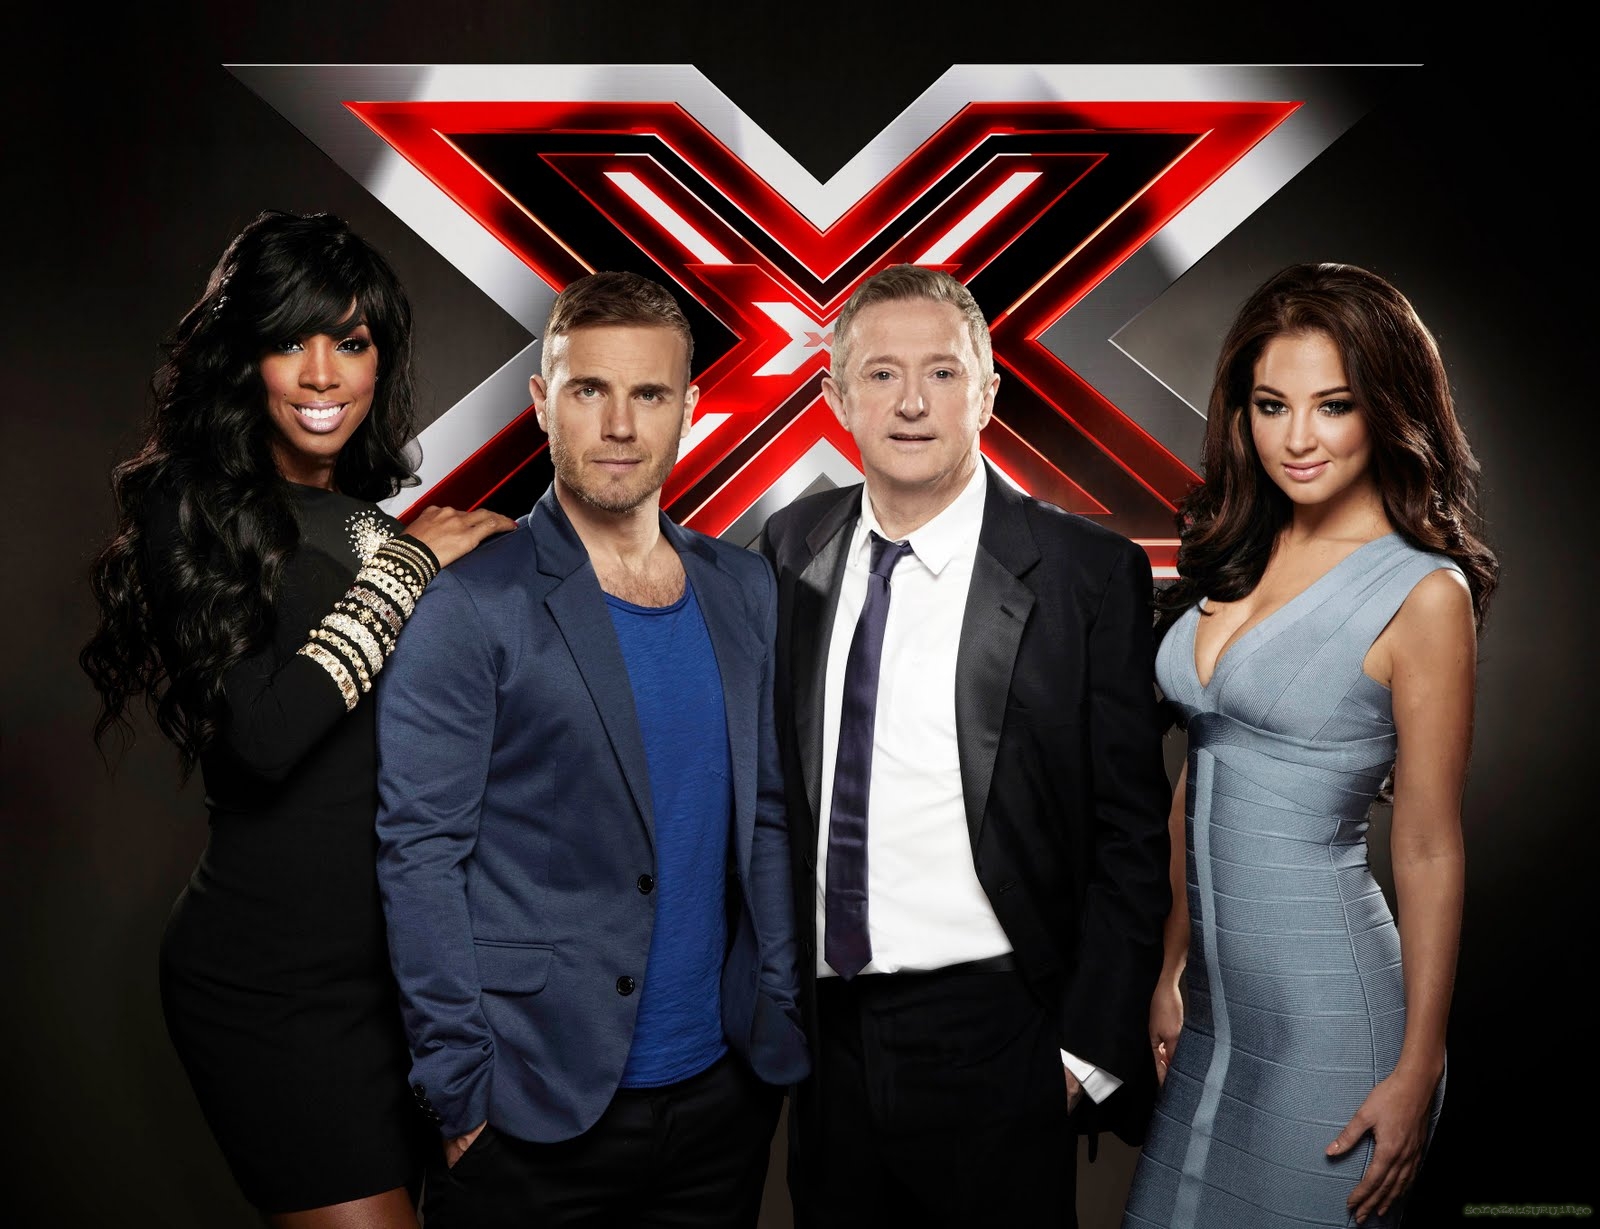 The X Factor 2011 Official Promotional Photoshoot [HQ] The X Factor